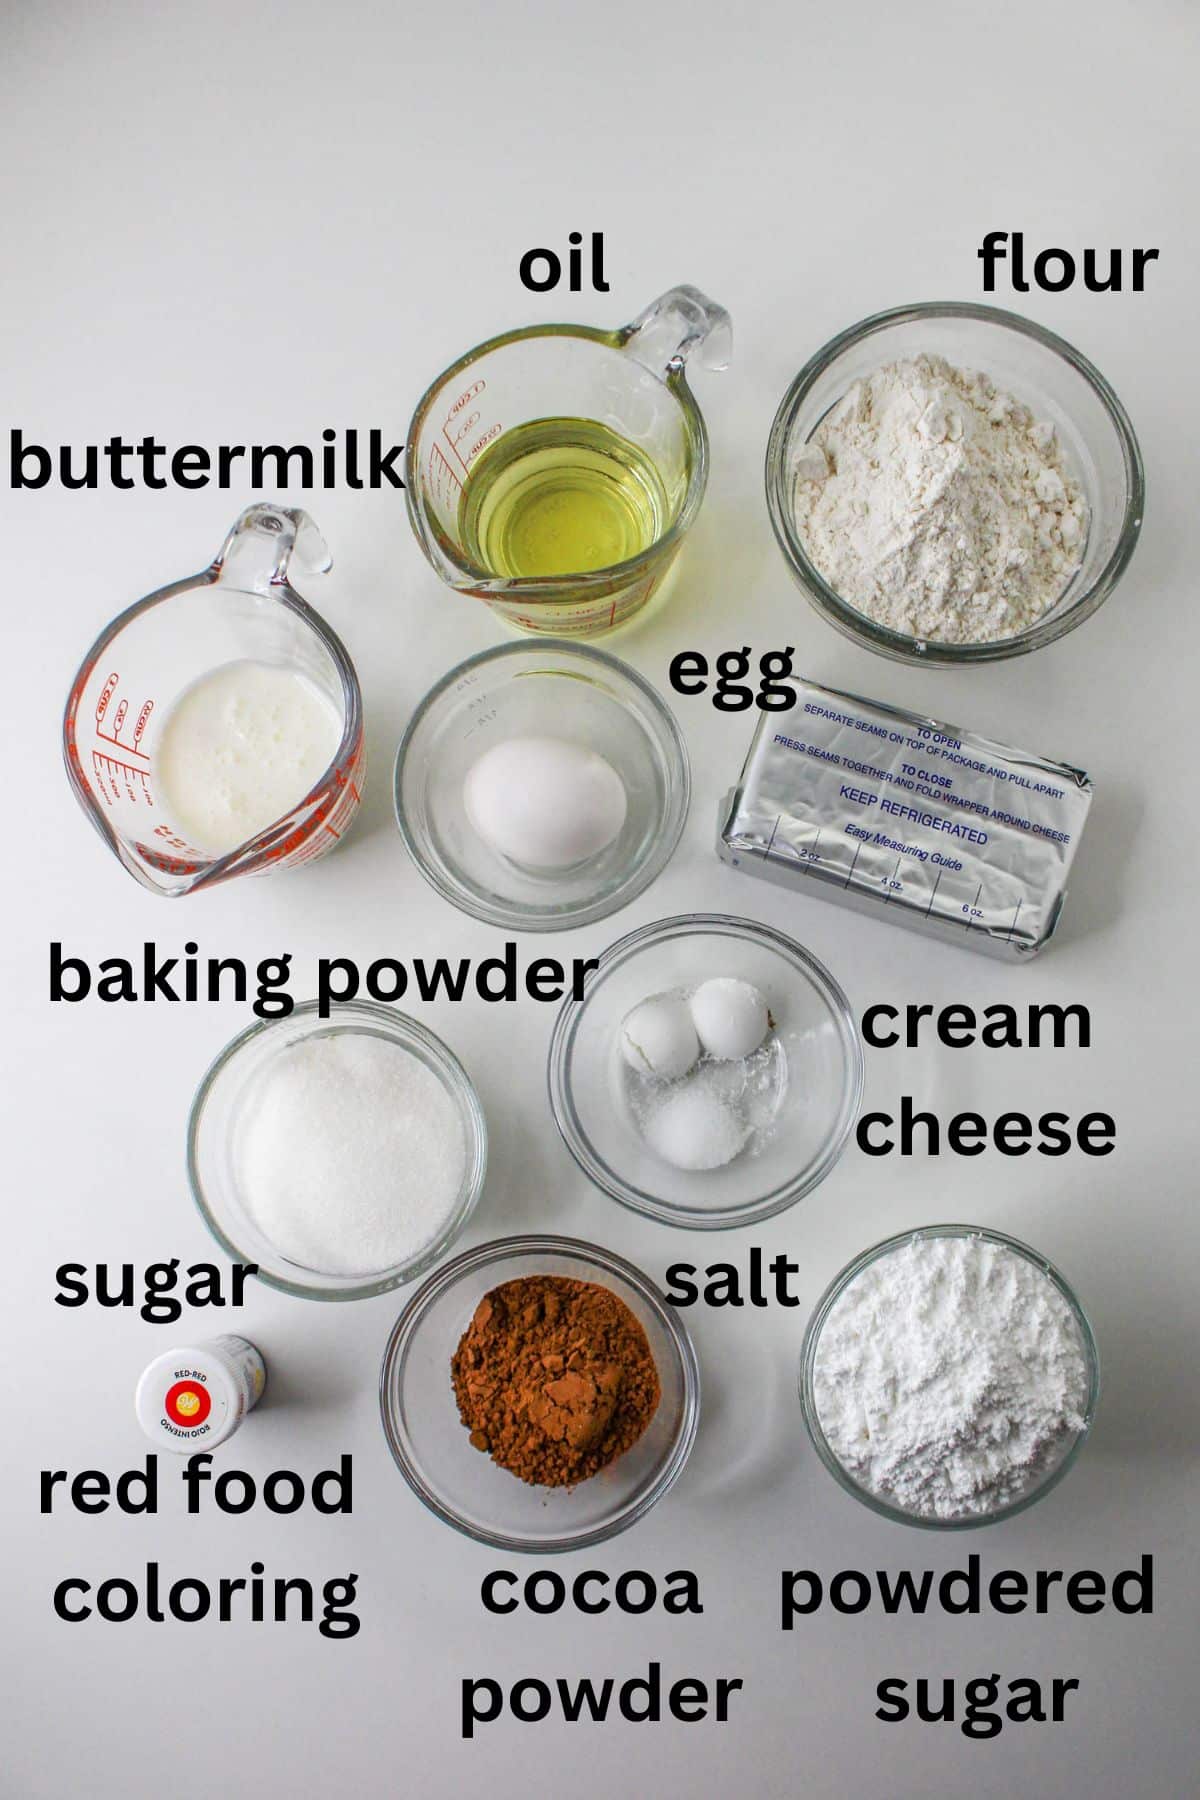 buttermilk, oil, flour, egg, baking powder, cream cheese, sugar, salt, red food coloring, cocoa powder, and powdered sugar on a white background